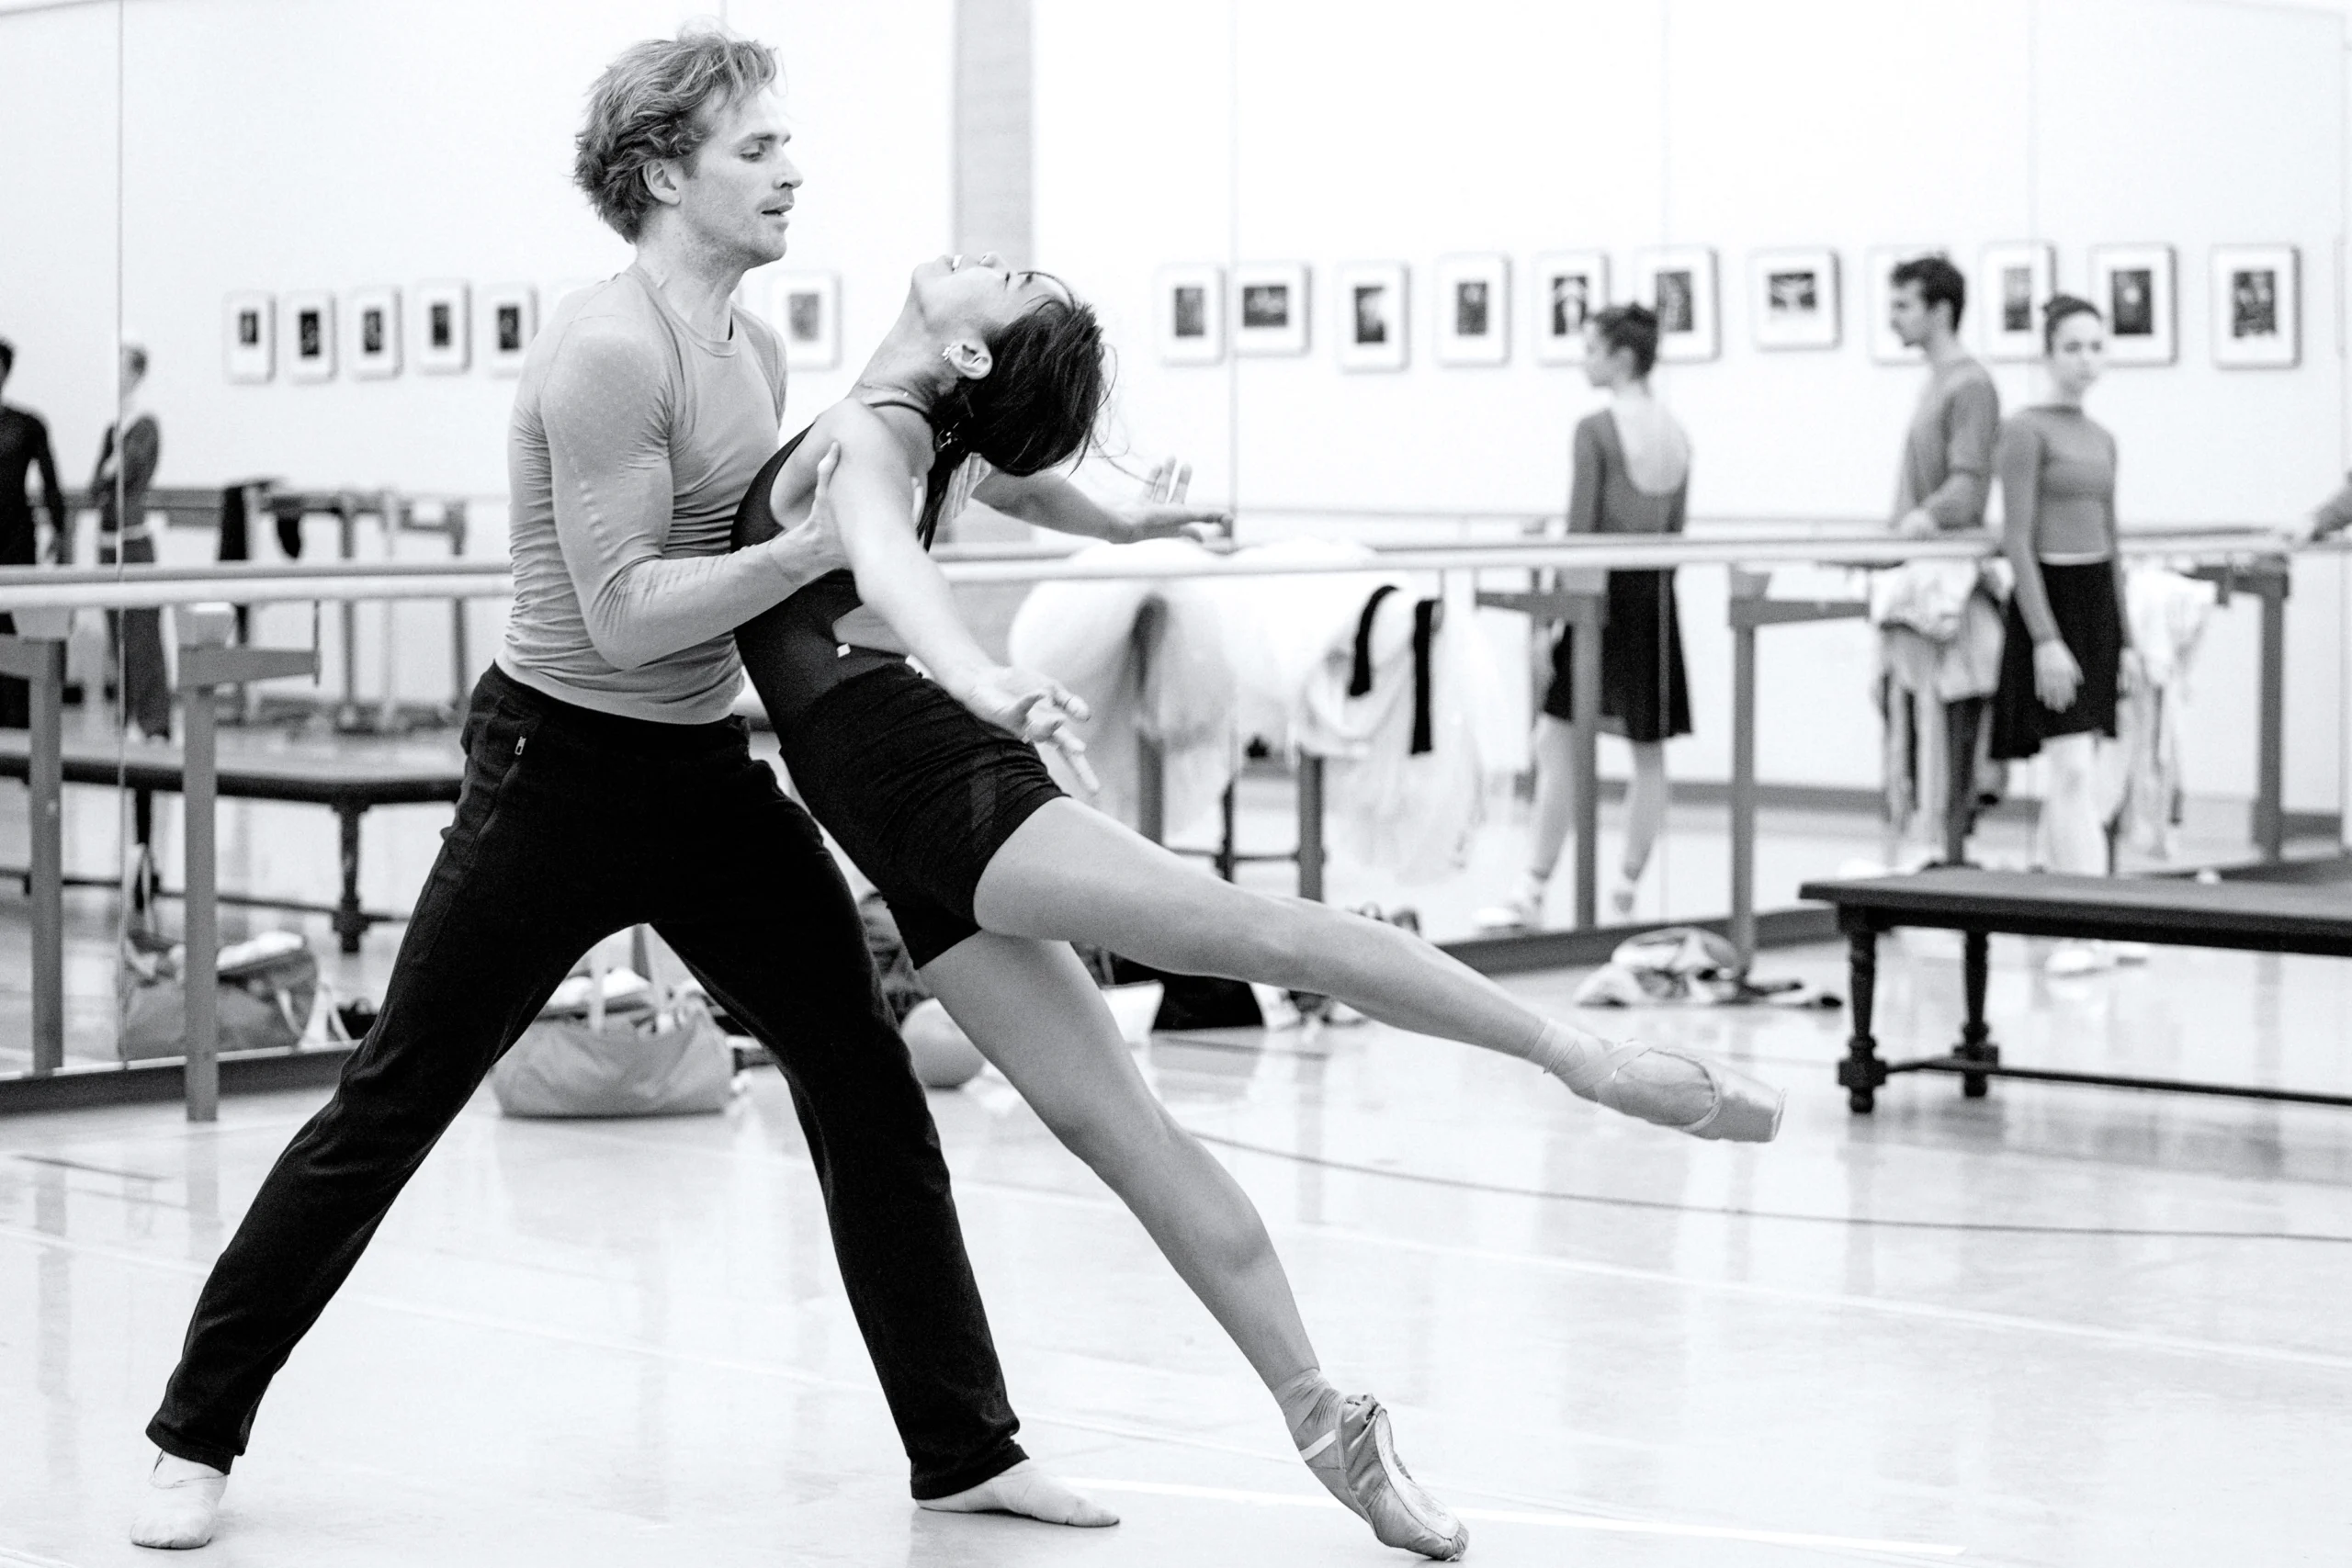 Jenna Savella and Harrison James in rehearsal for Emma Bovary. They dance an emotional pas de deux together in a dance studio; she falls forward into his arms with an emotional look of desperation, and he catches her under her armpits.